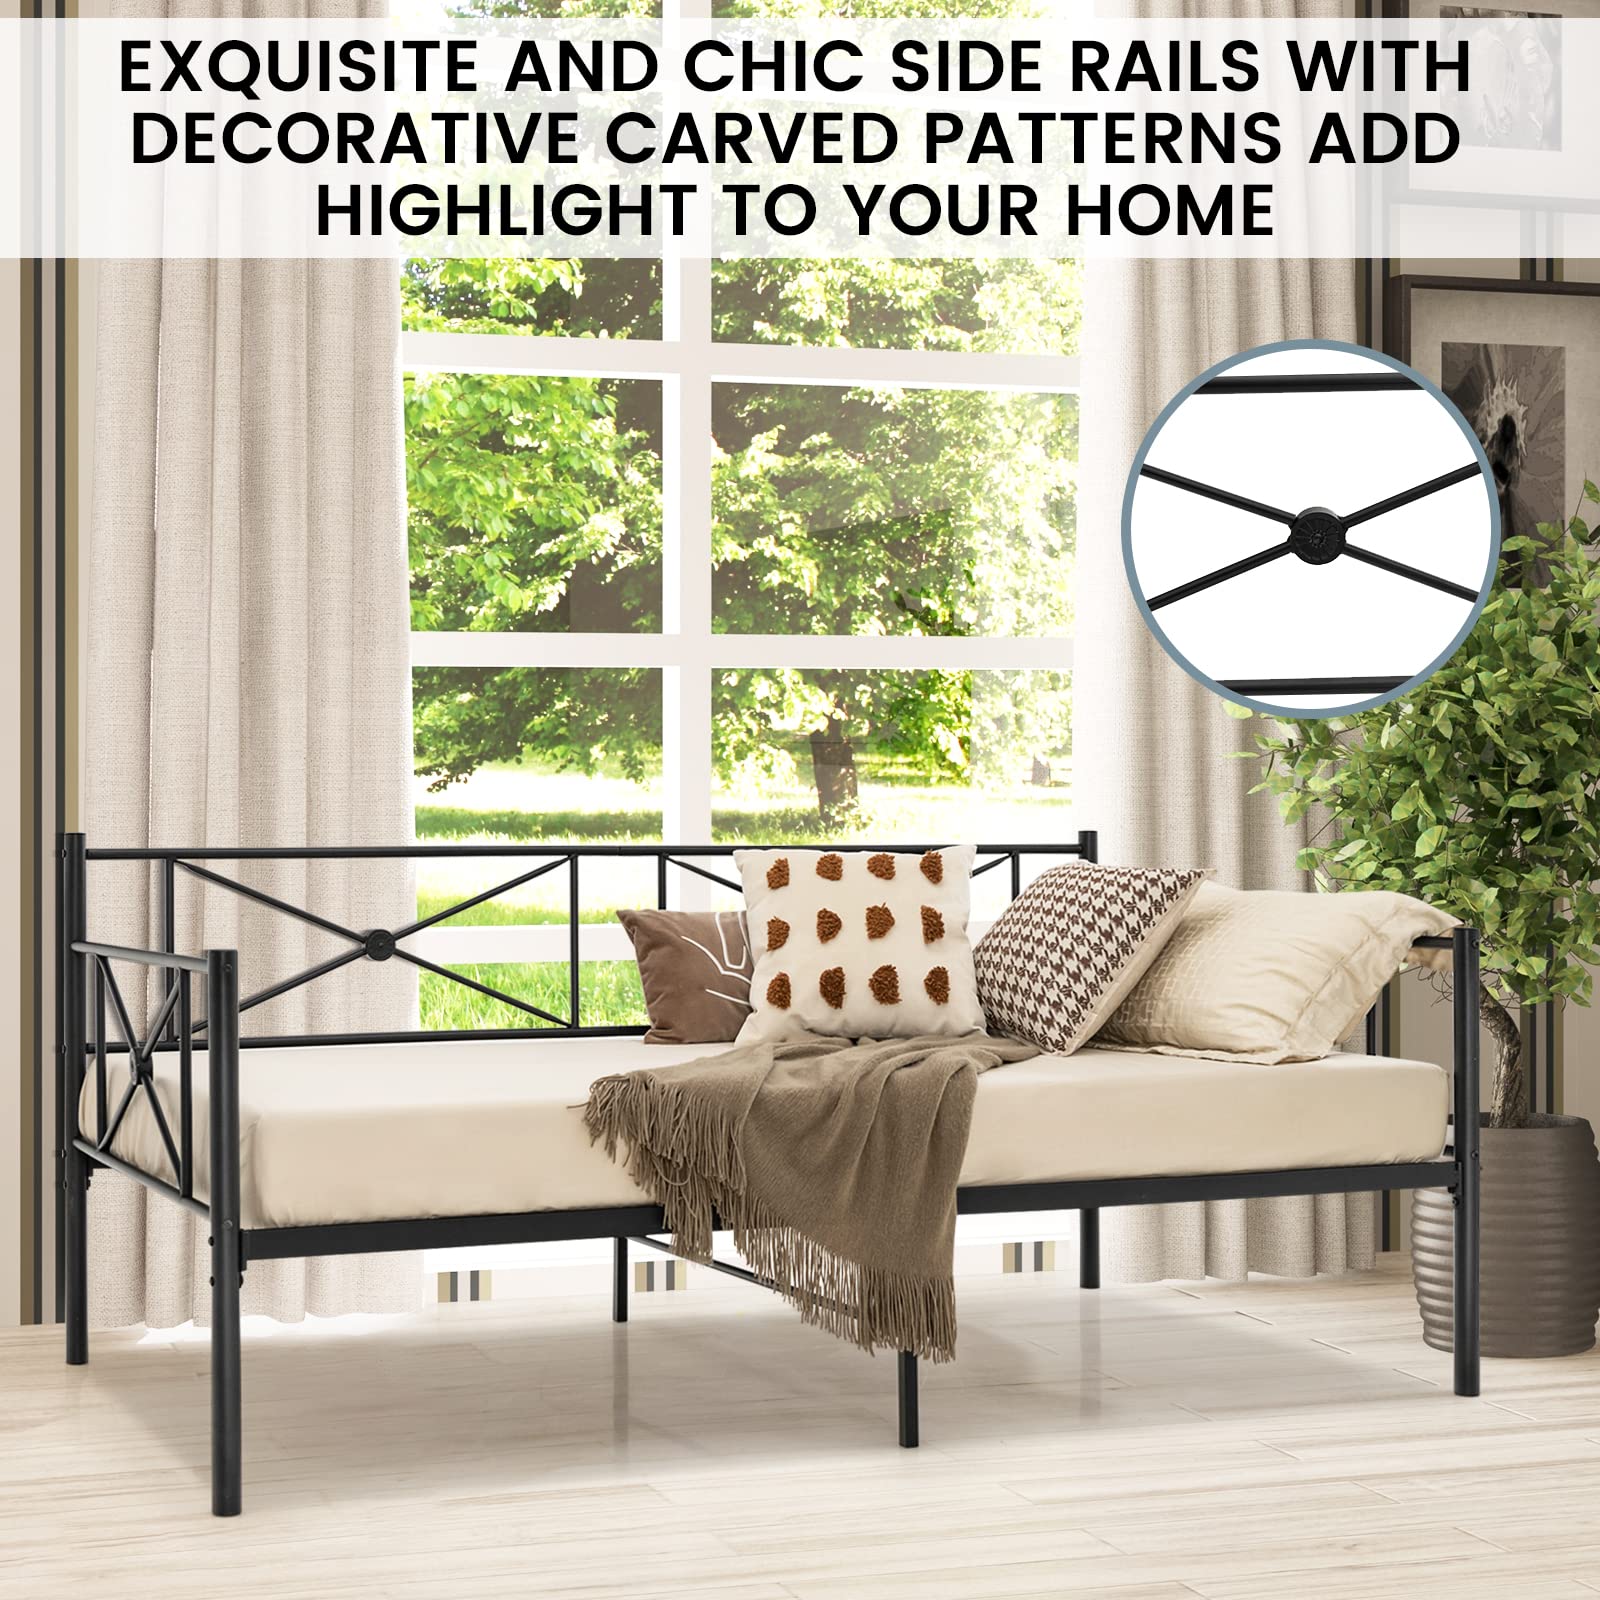 Giantex Metal Daybed Frame Twin Size, for Living Room Bedroom Guest Room, Easy Assembly, Black & White